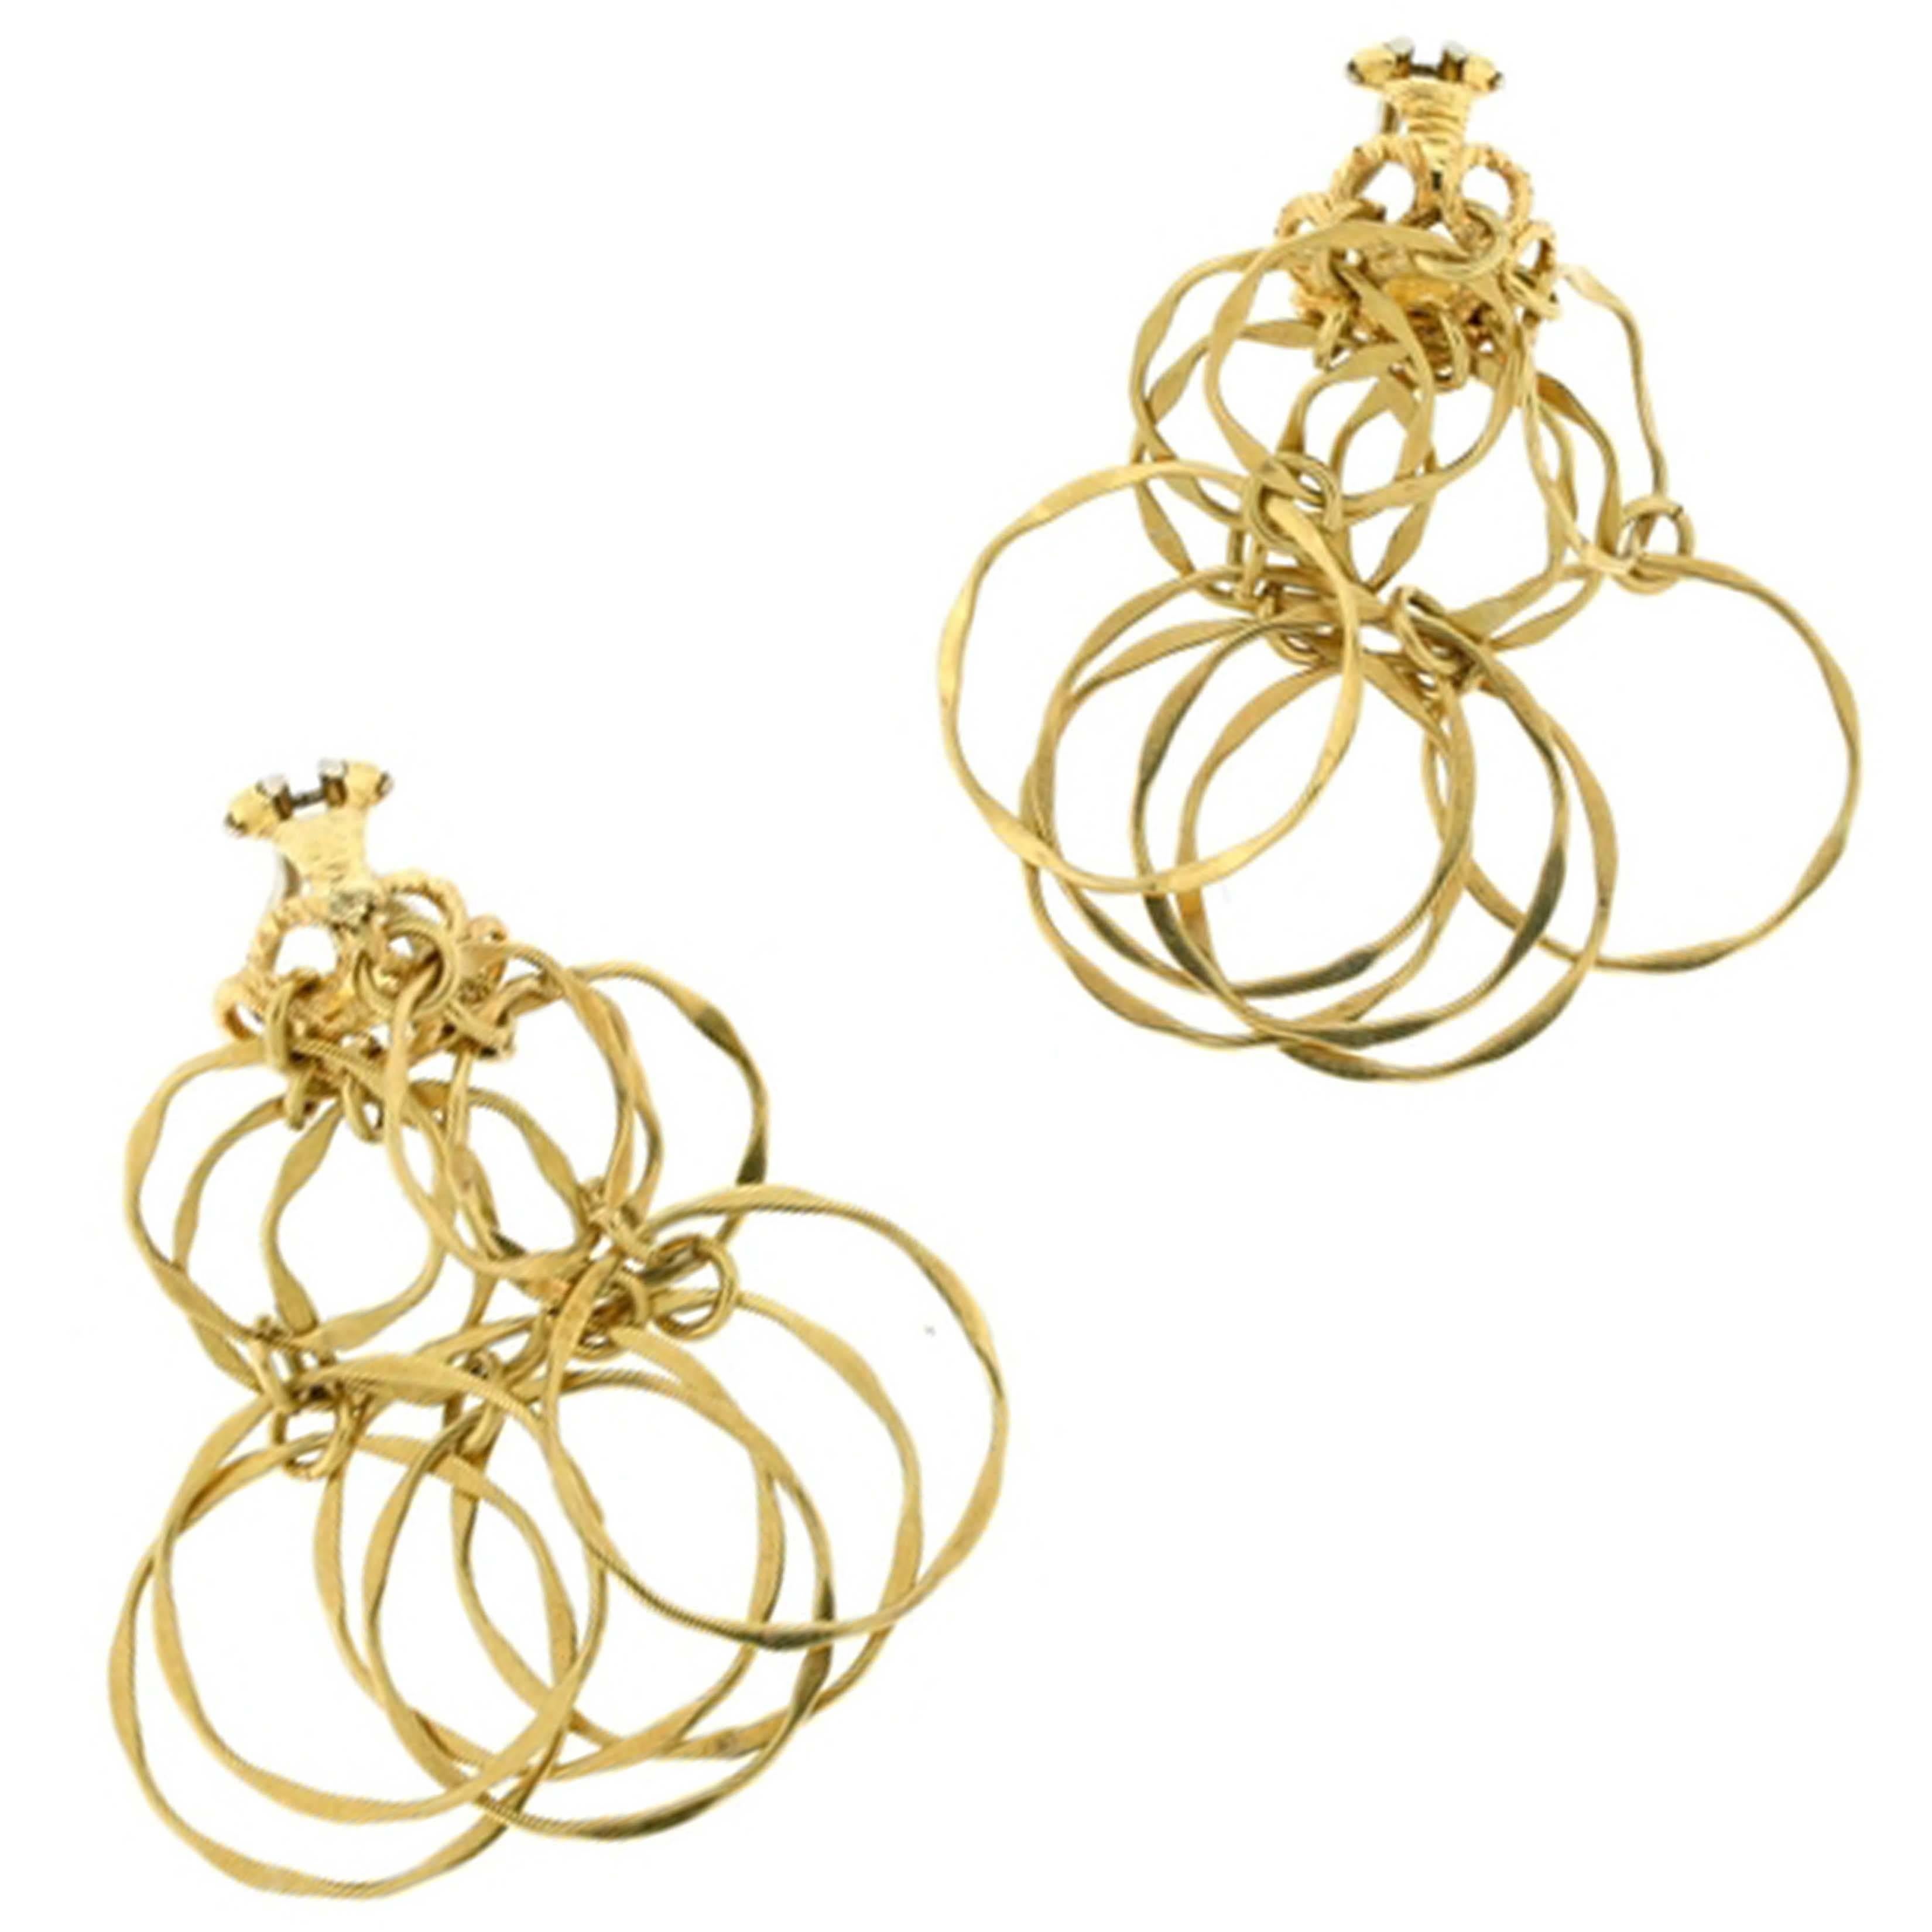 Six double-hoop tiers of hammered 18kt gold dangle from a textured, open-work ear-clip. The resulting earring is light, delicate and free. Overlapping circles lend the earring an open, airy depth; the tiers never lay exactly flat but rather jingle